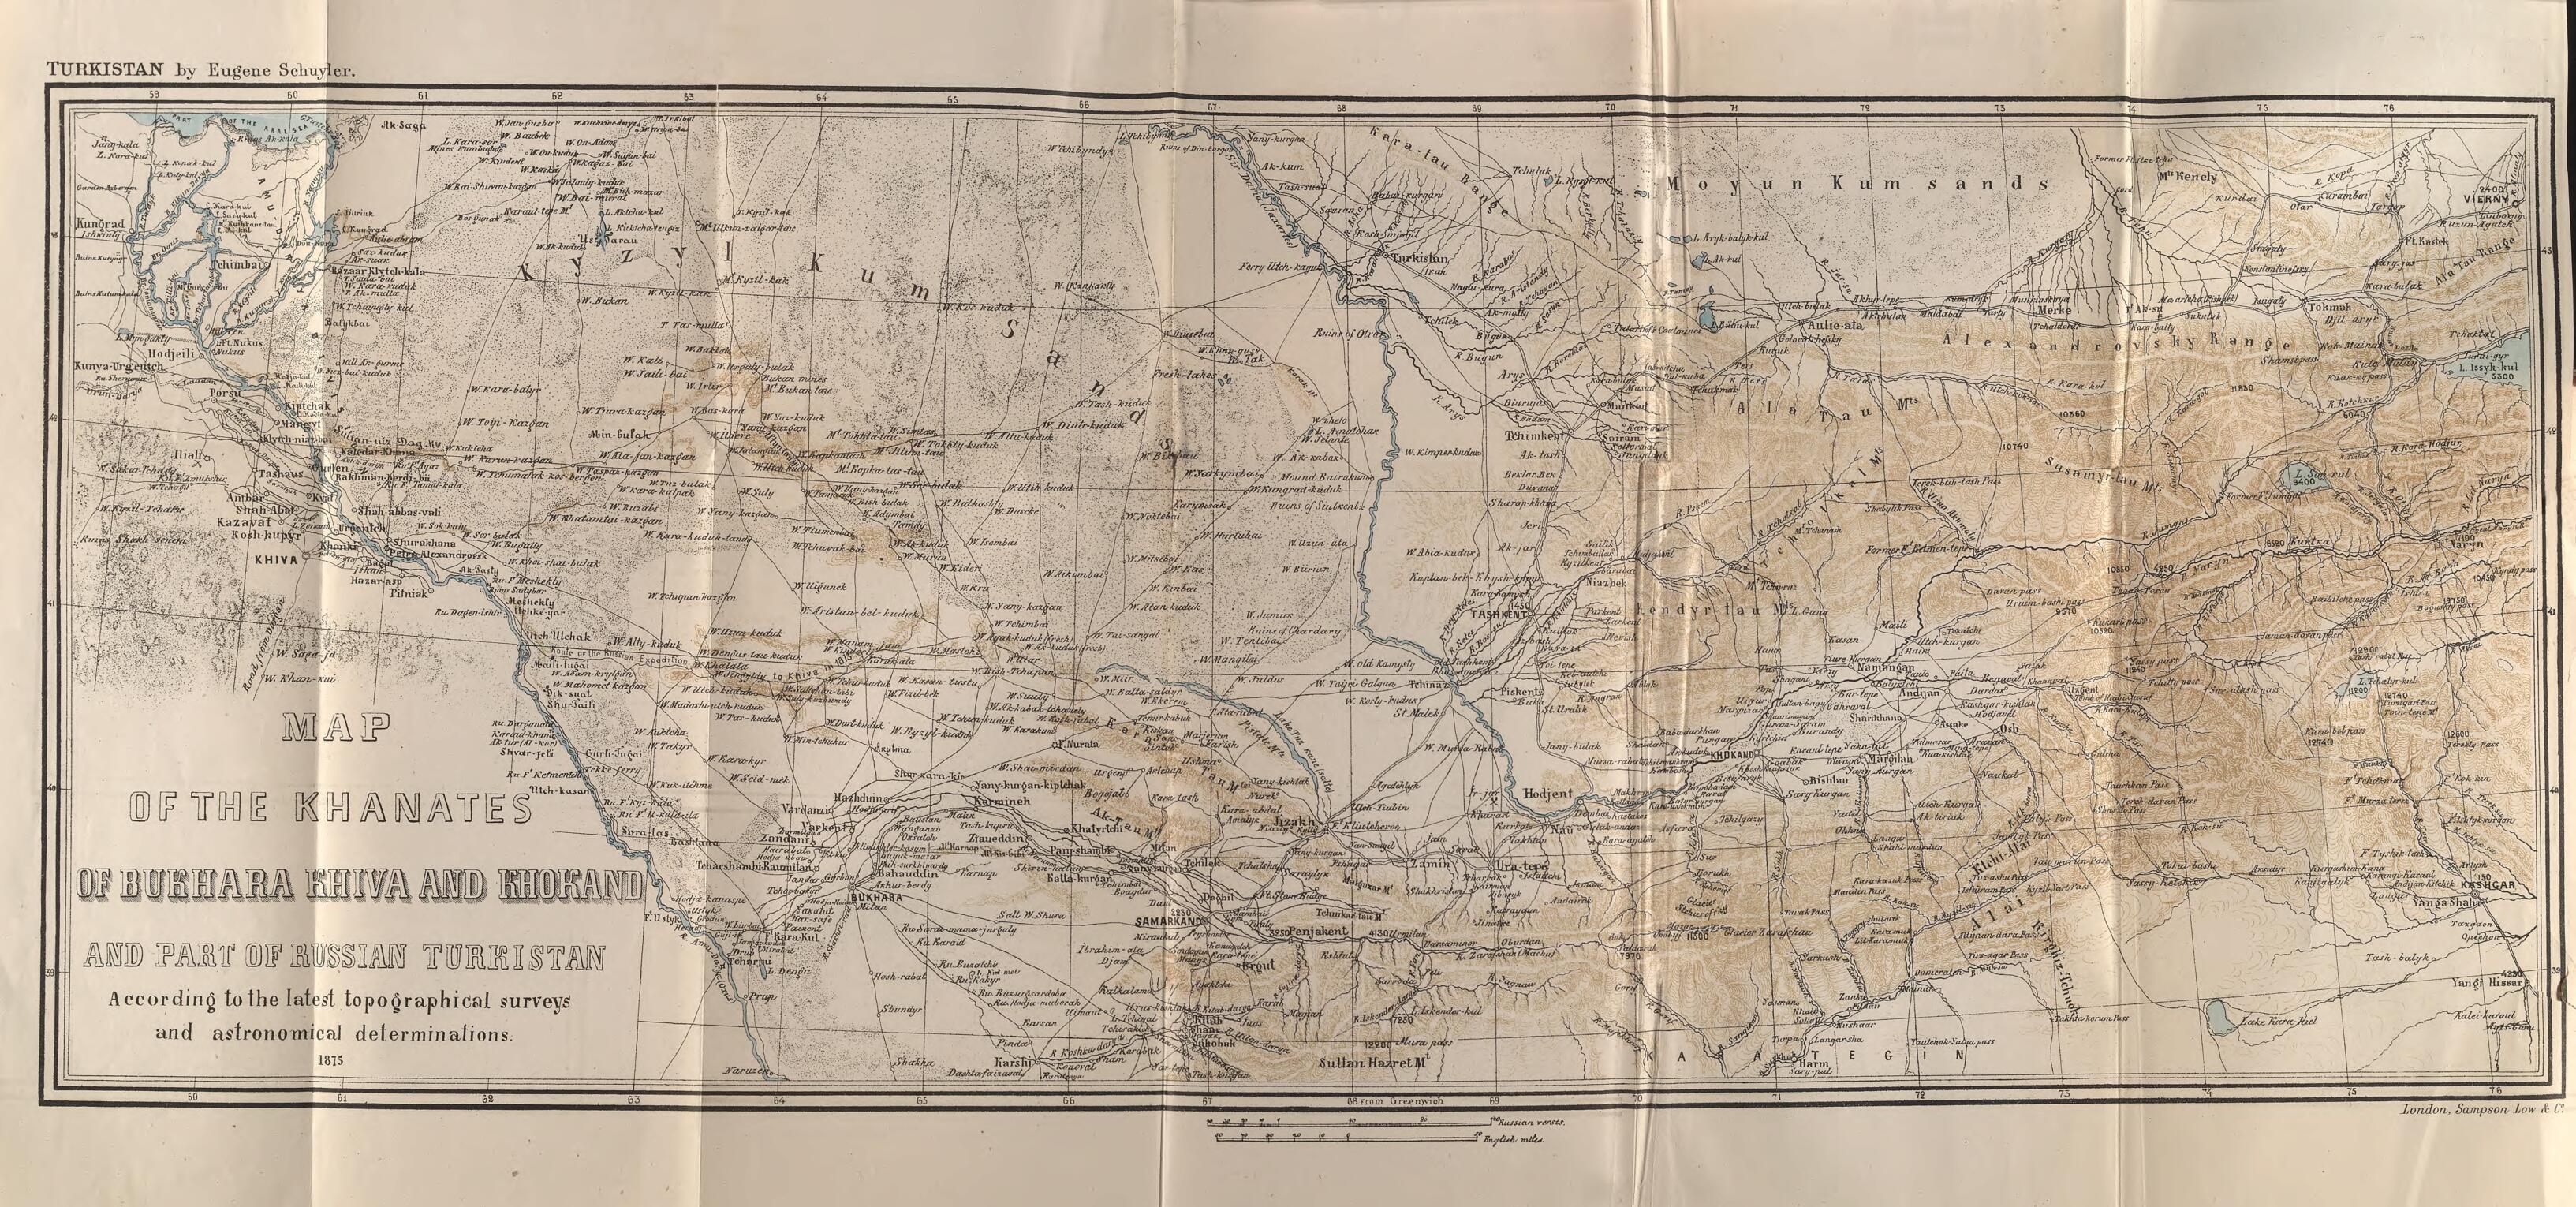 This old map of Map of the Khanates of Bukhara, Khiva, and Khokand and Part of Russian Turkistan from 1875 was created by Eugene Schuyler in 1875